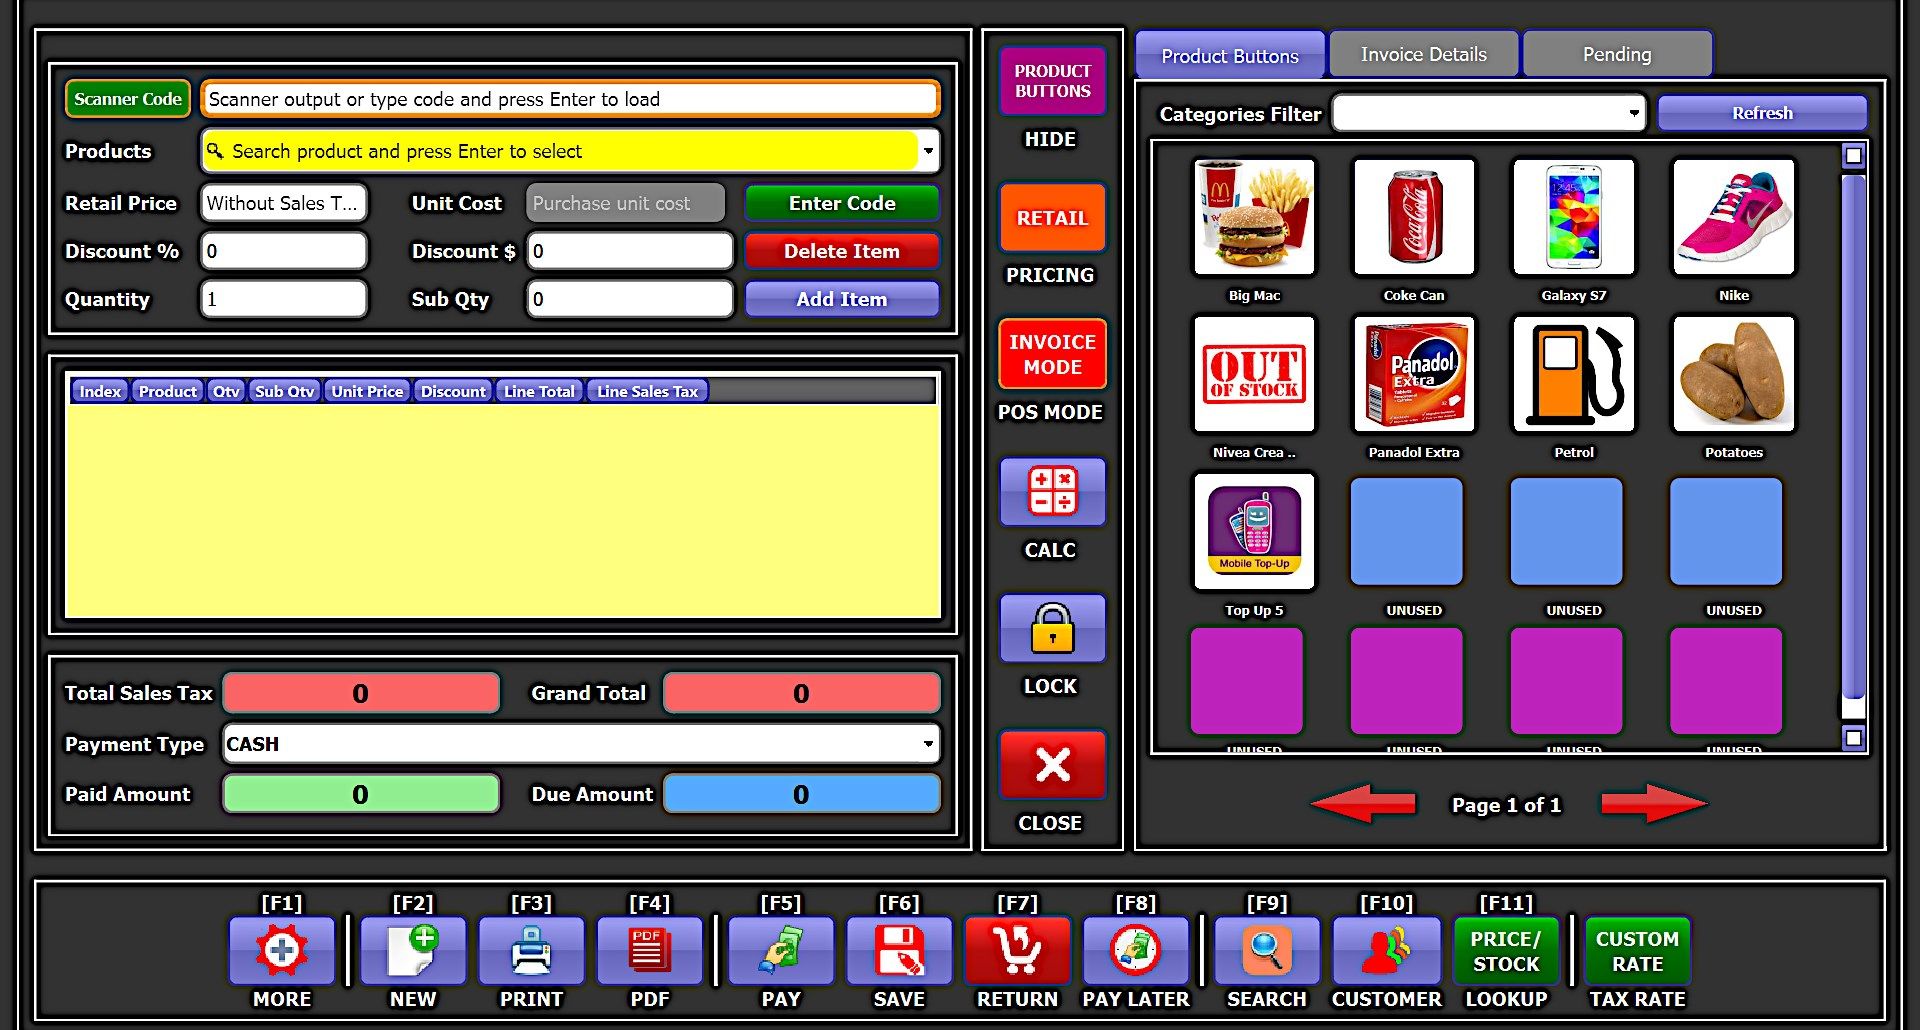 Point of Sale (POS) Screen